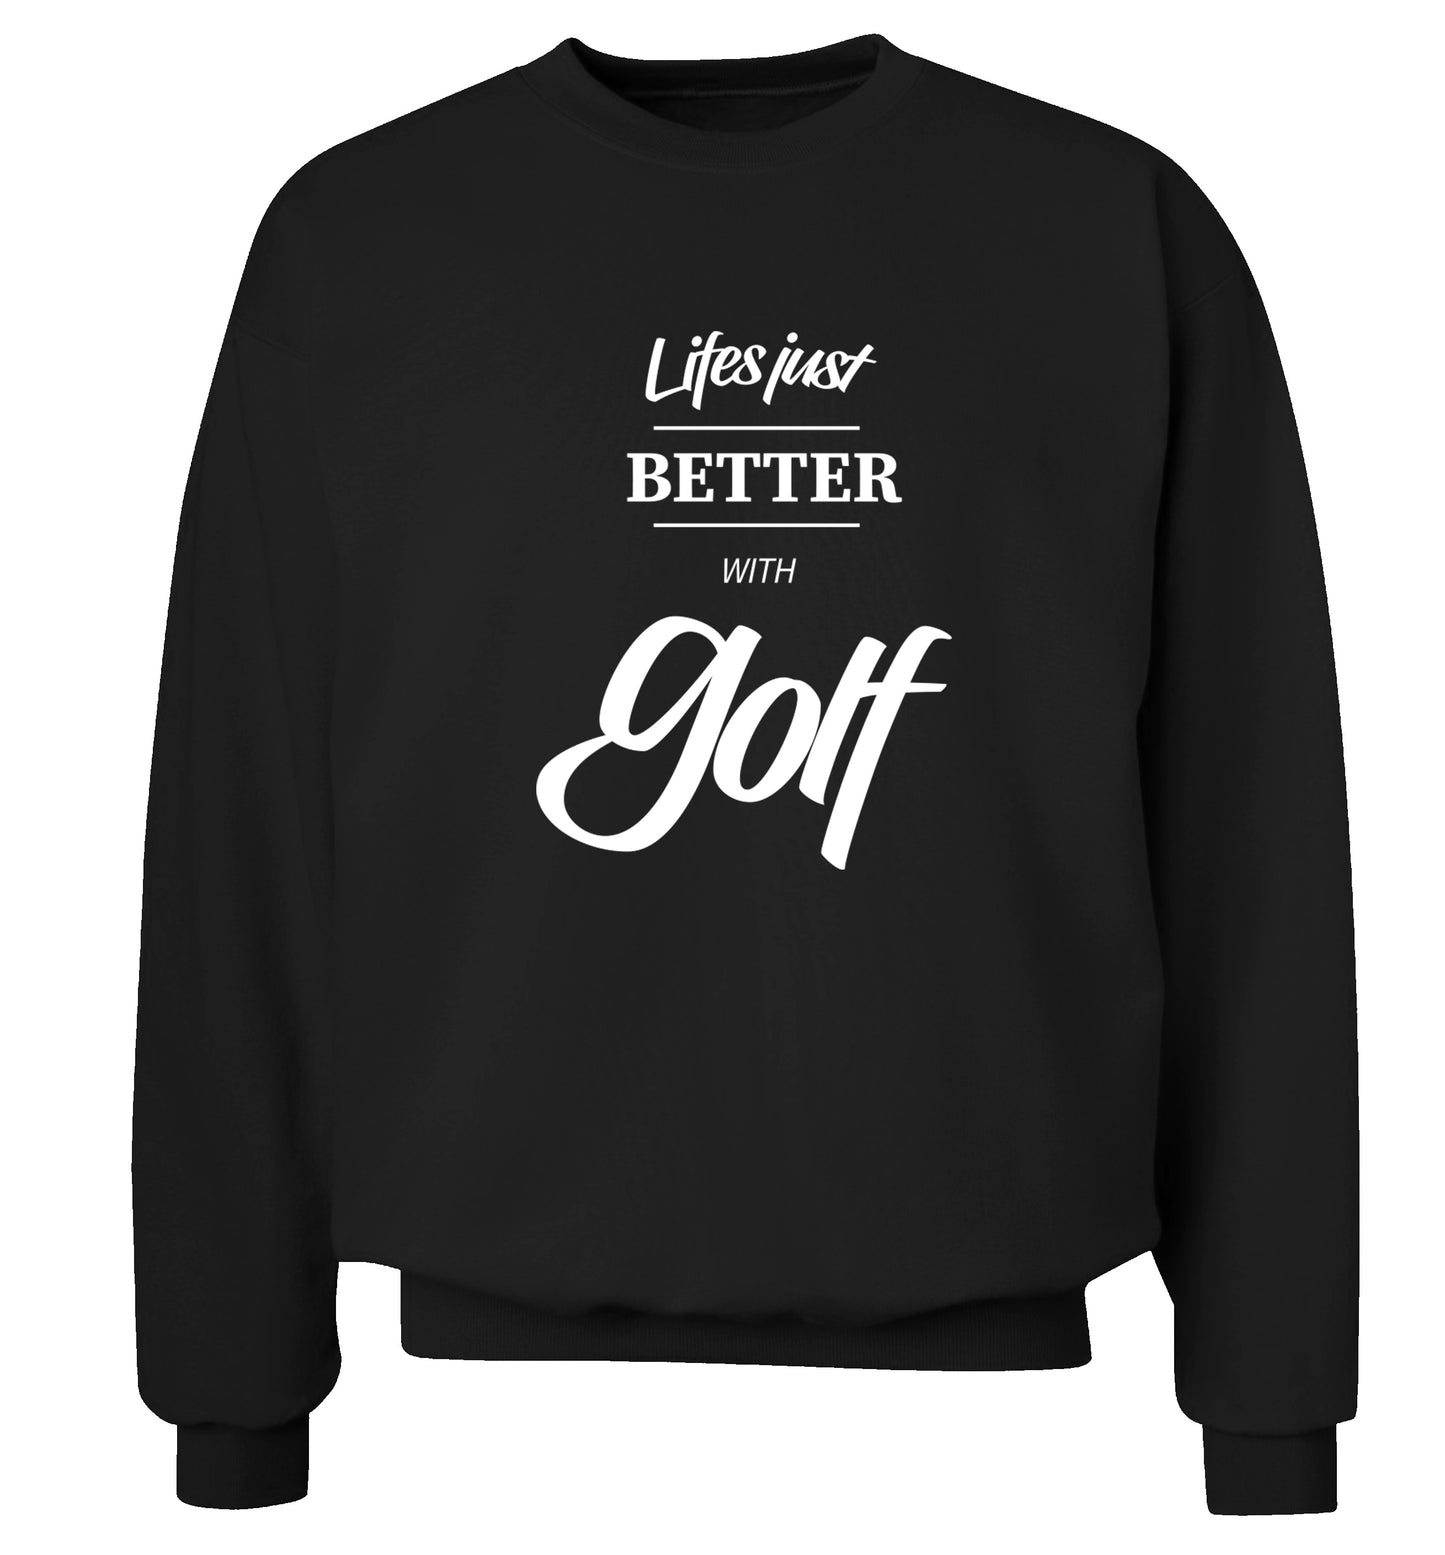 Life is better with golf Adult's unisex black Sweater 2XL